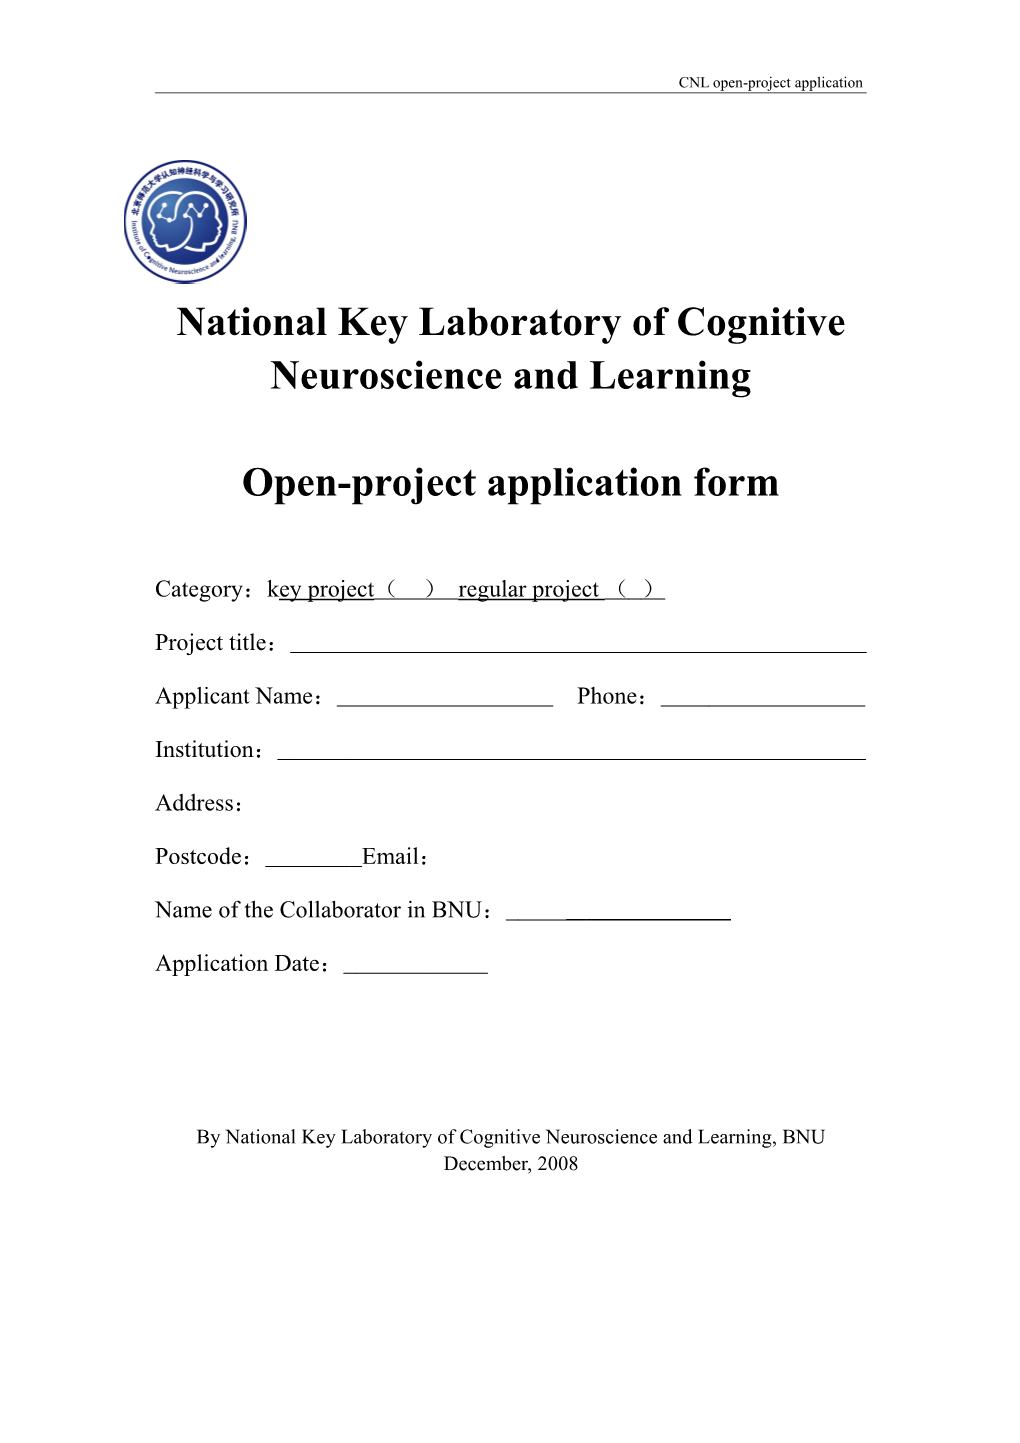 National Key Laboratory of Cognitive Neuroscience and Learning